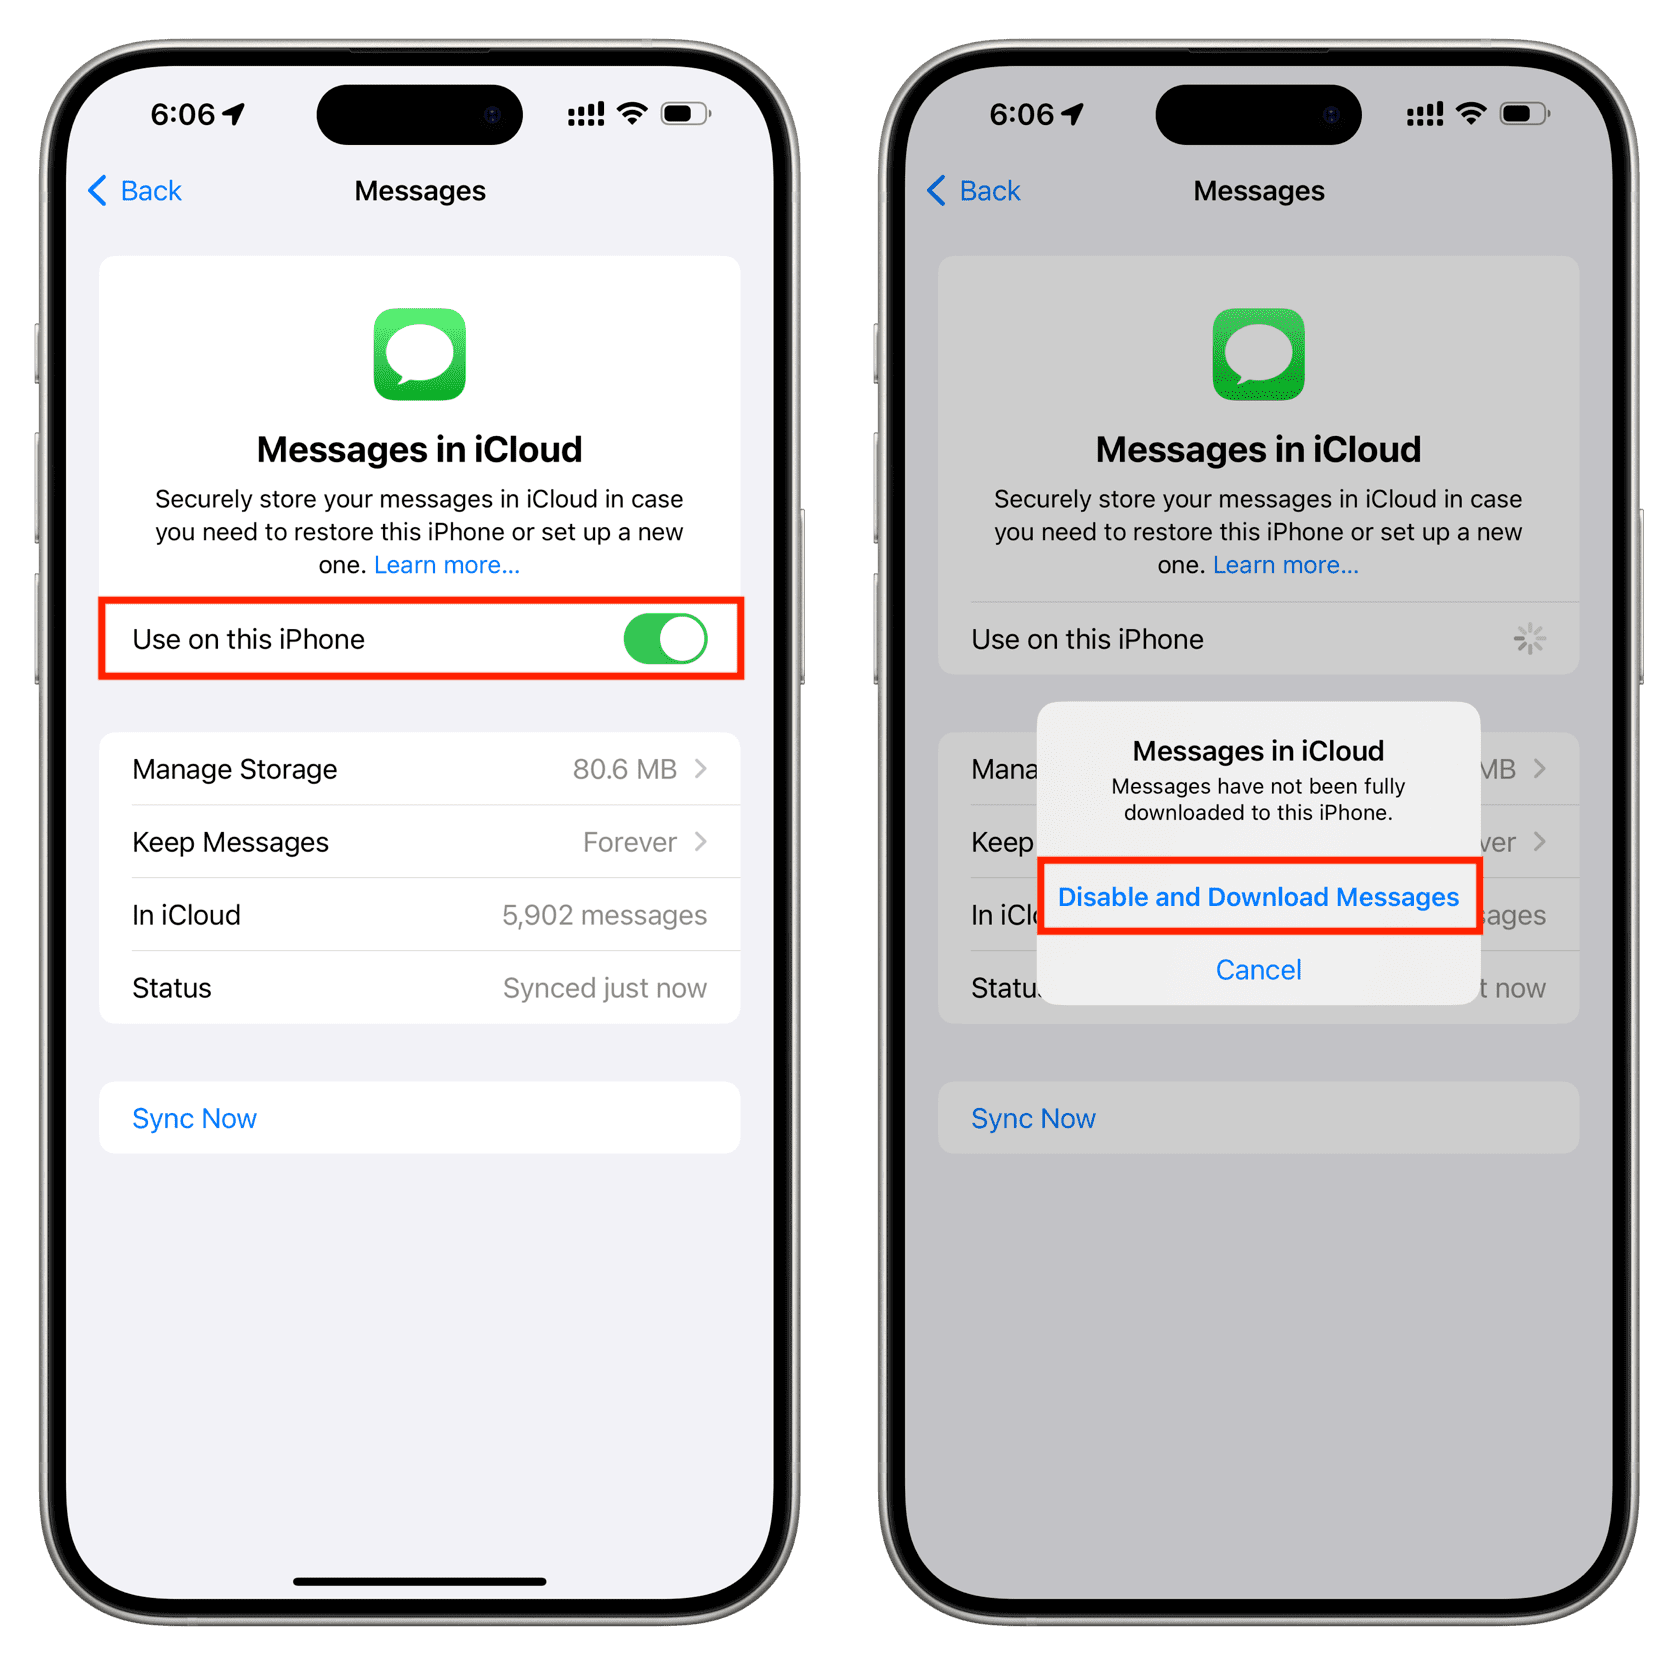 Turn off Messages in iCloud and tap Disable and Download Messages on iPhone